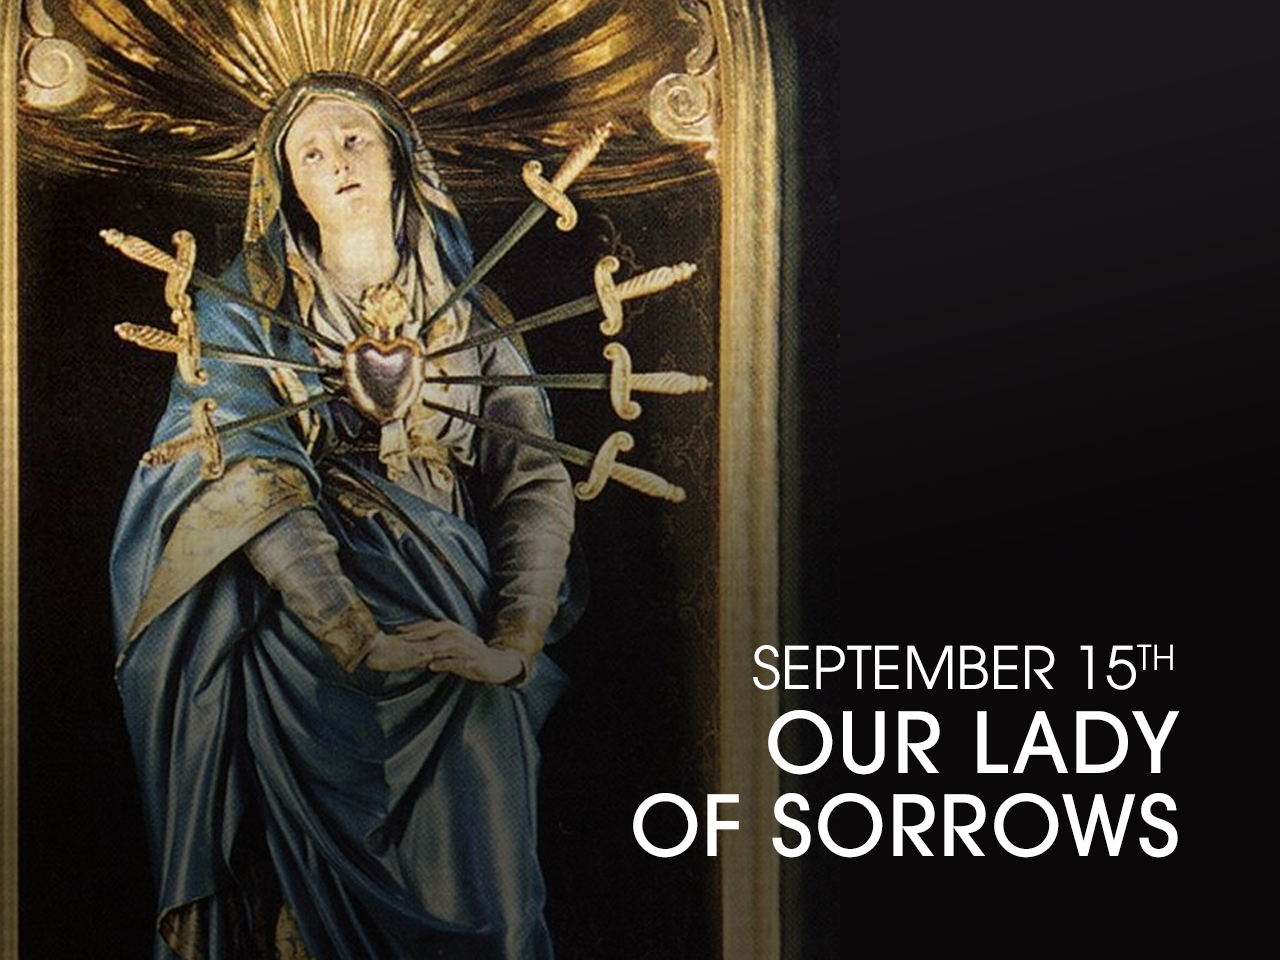 Our Lady of Sorrows (Mater Dolorosa)